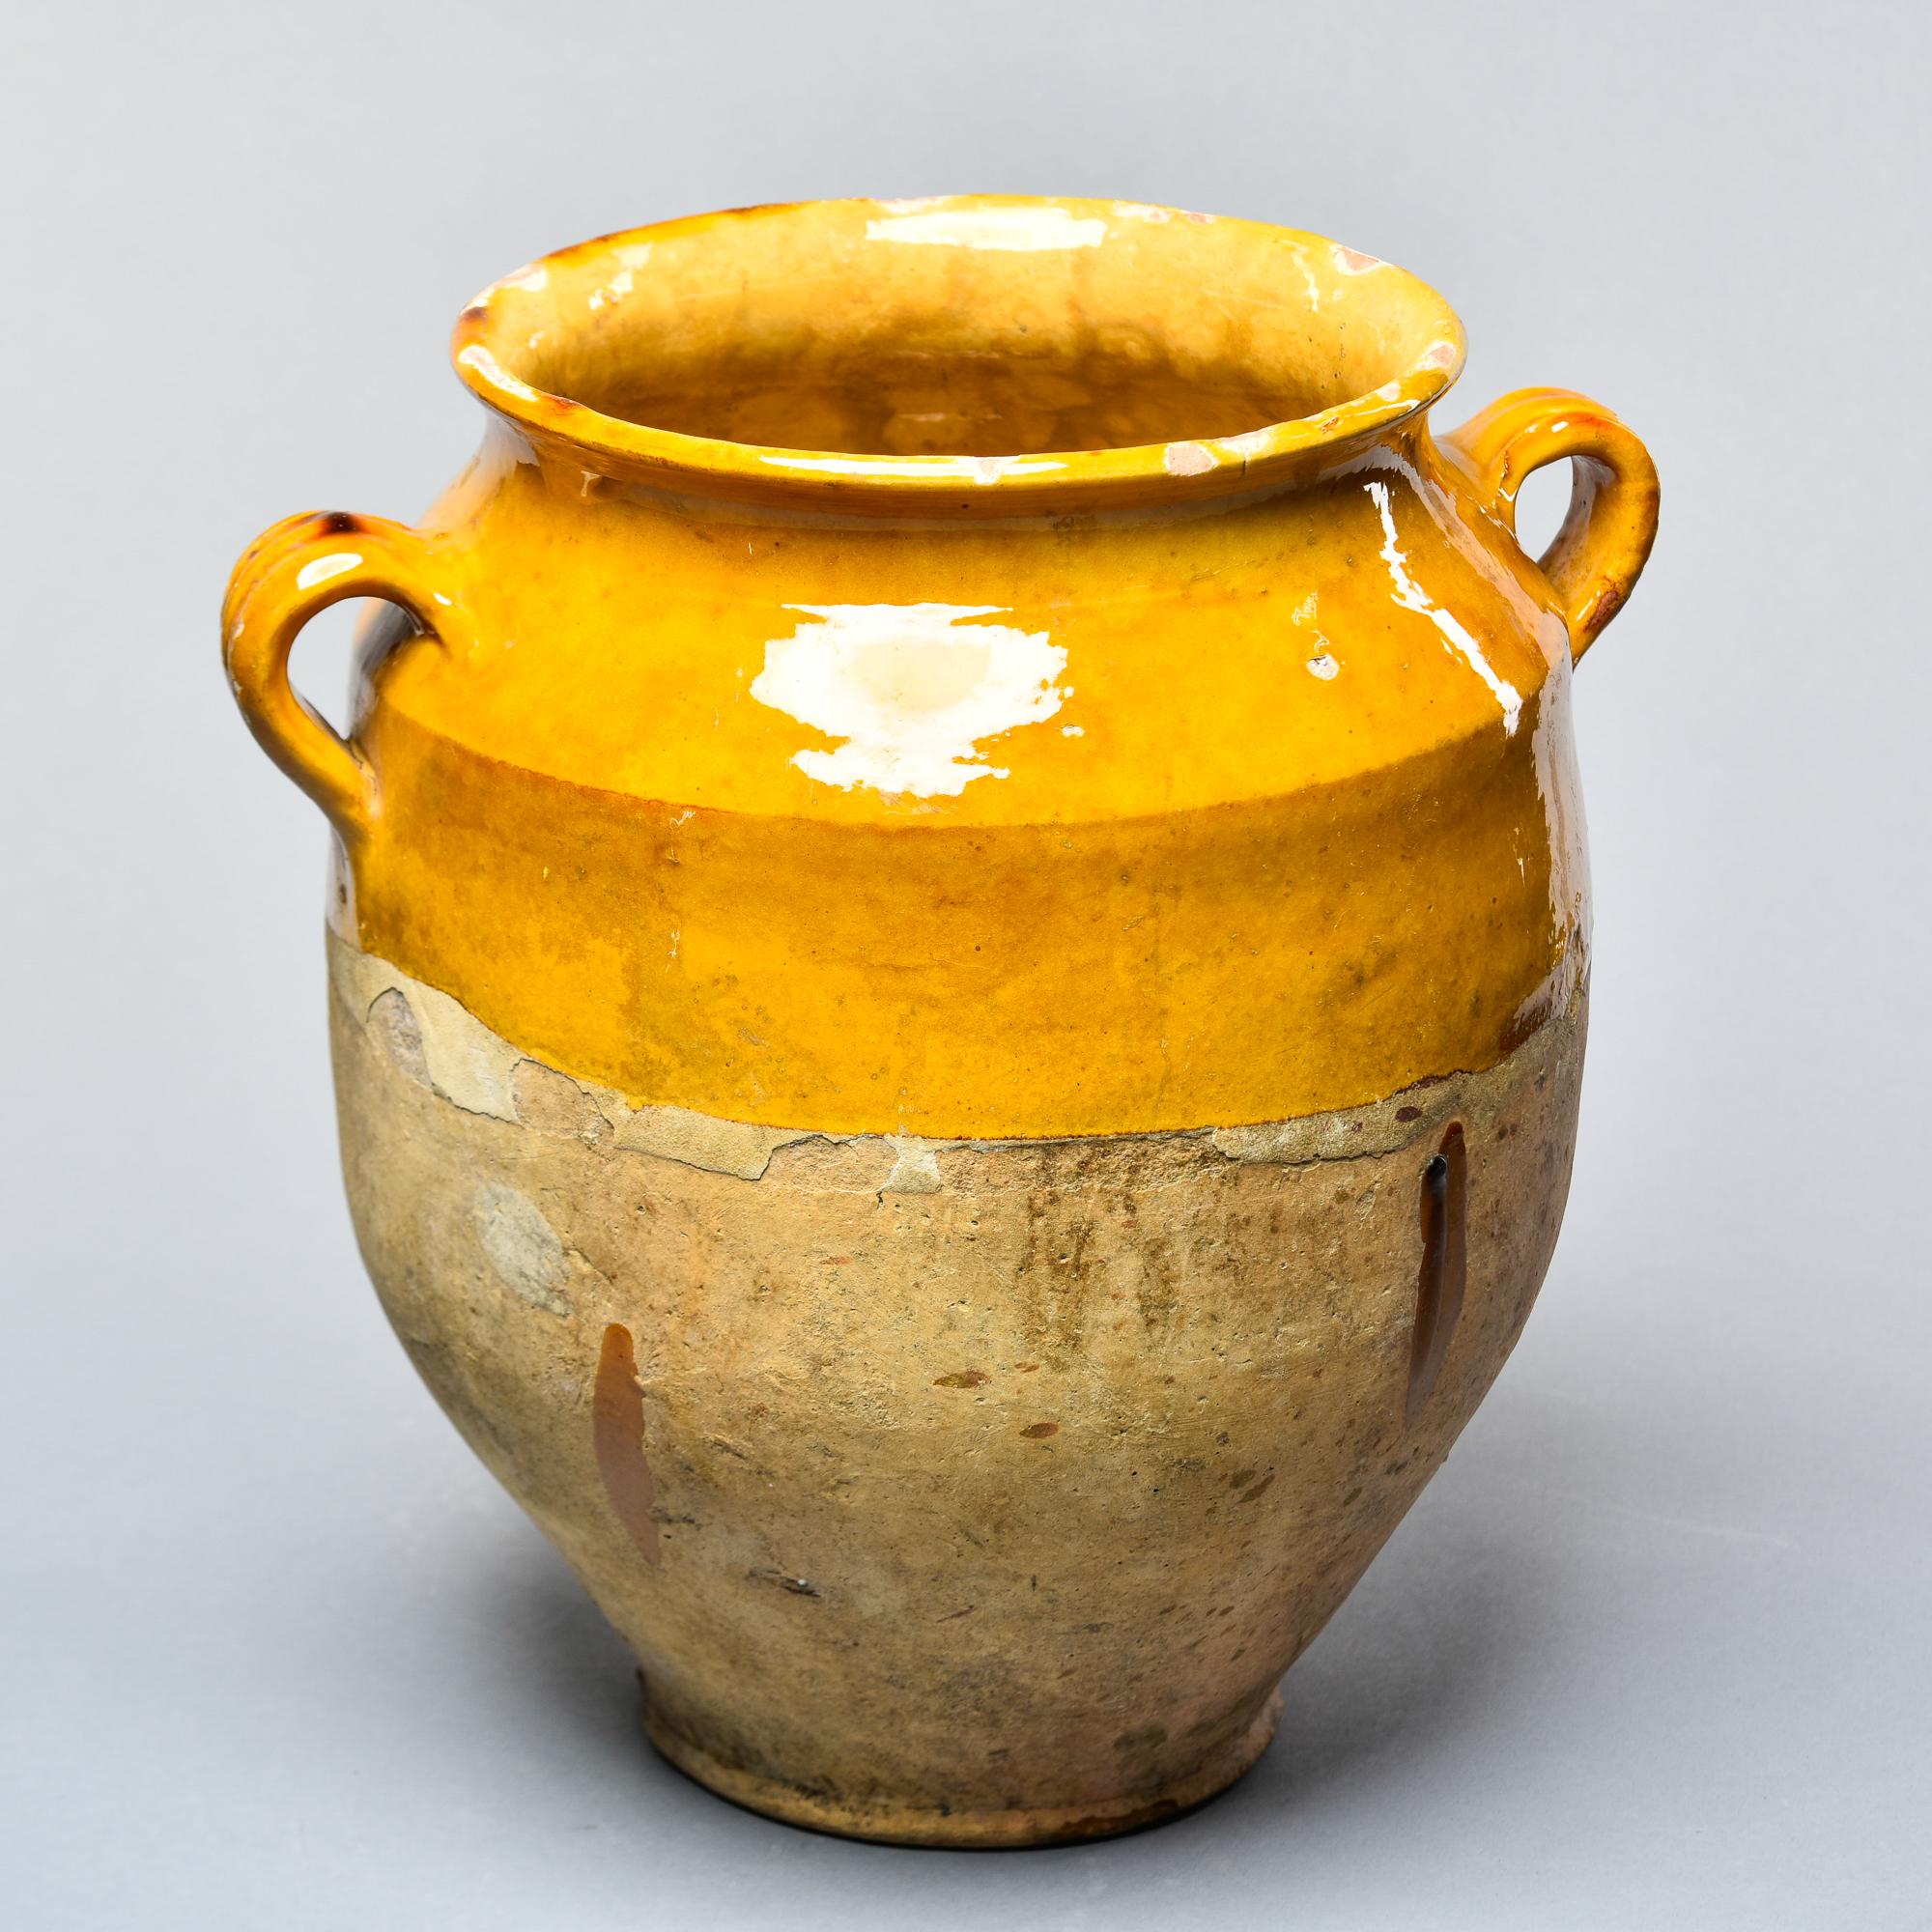 Ceramic Early 20th Century French Mustard Colored Glazed Confit Jar